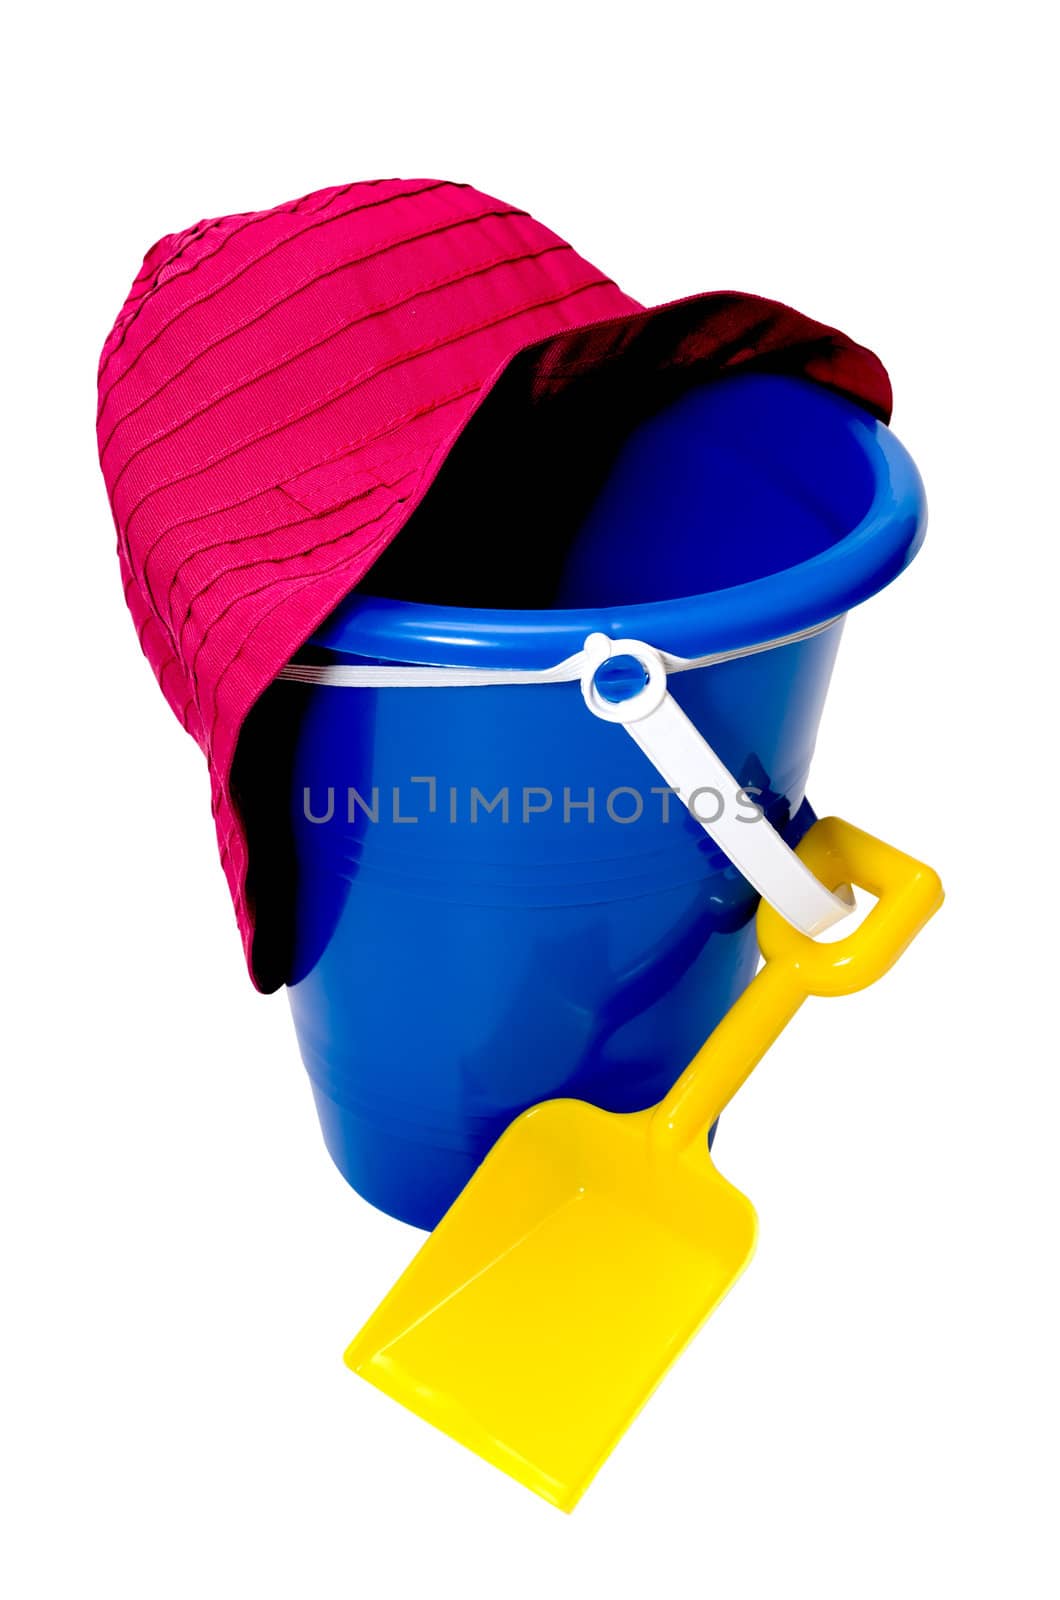 Beach toys isolated on white background with clipping path.  Sand pail, shovel, and beach hat.